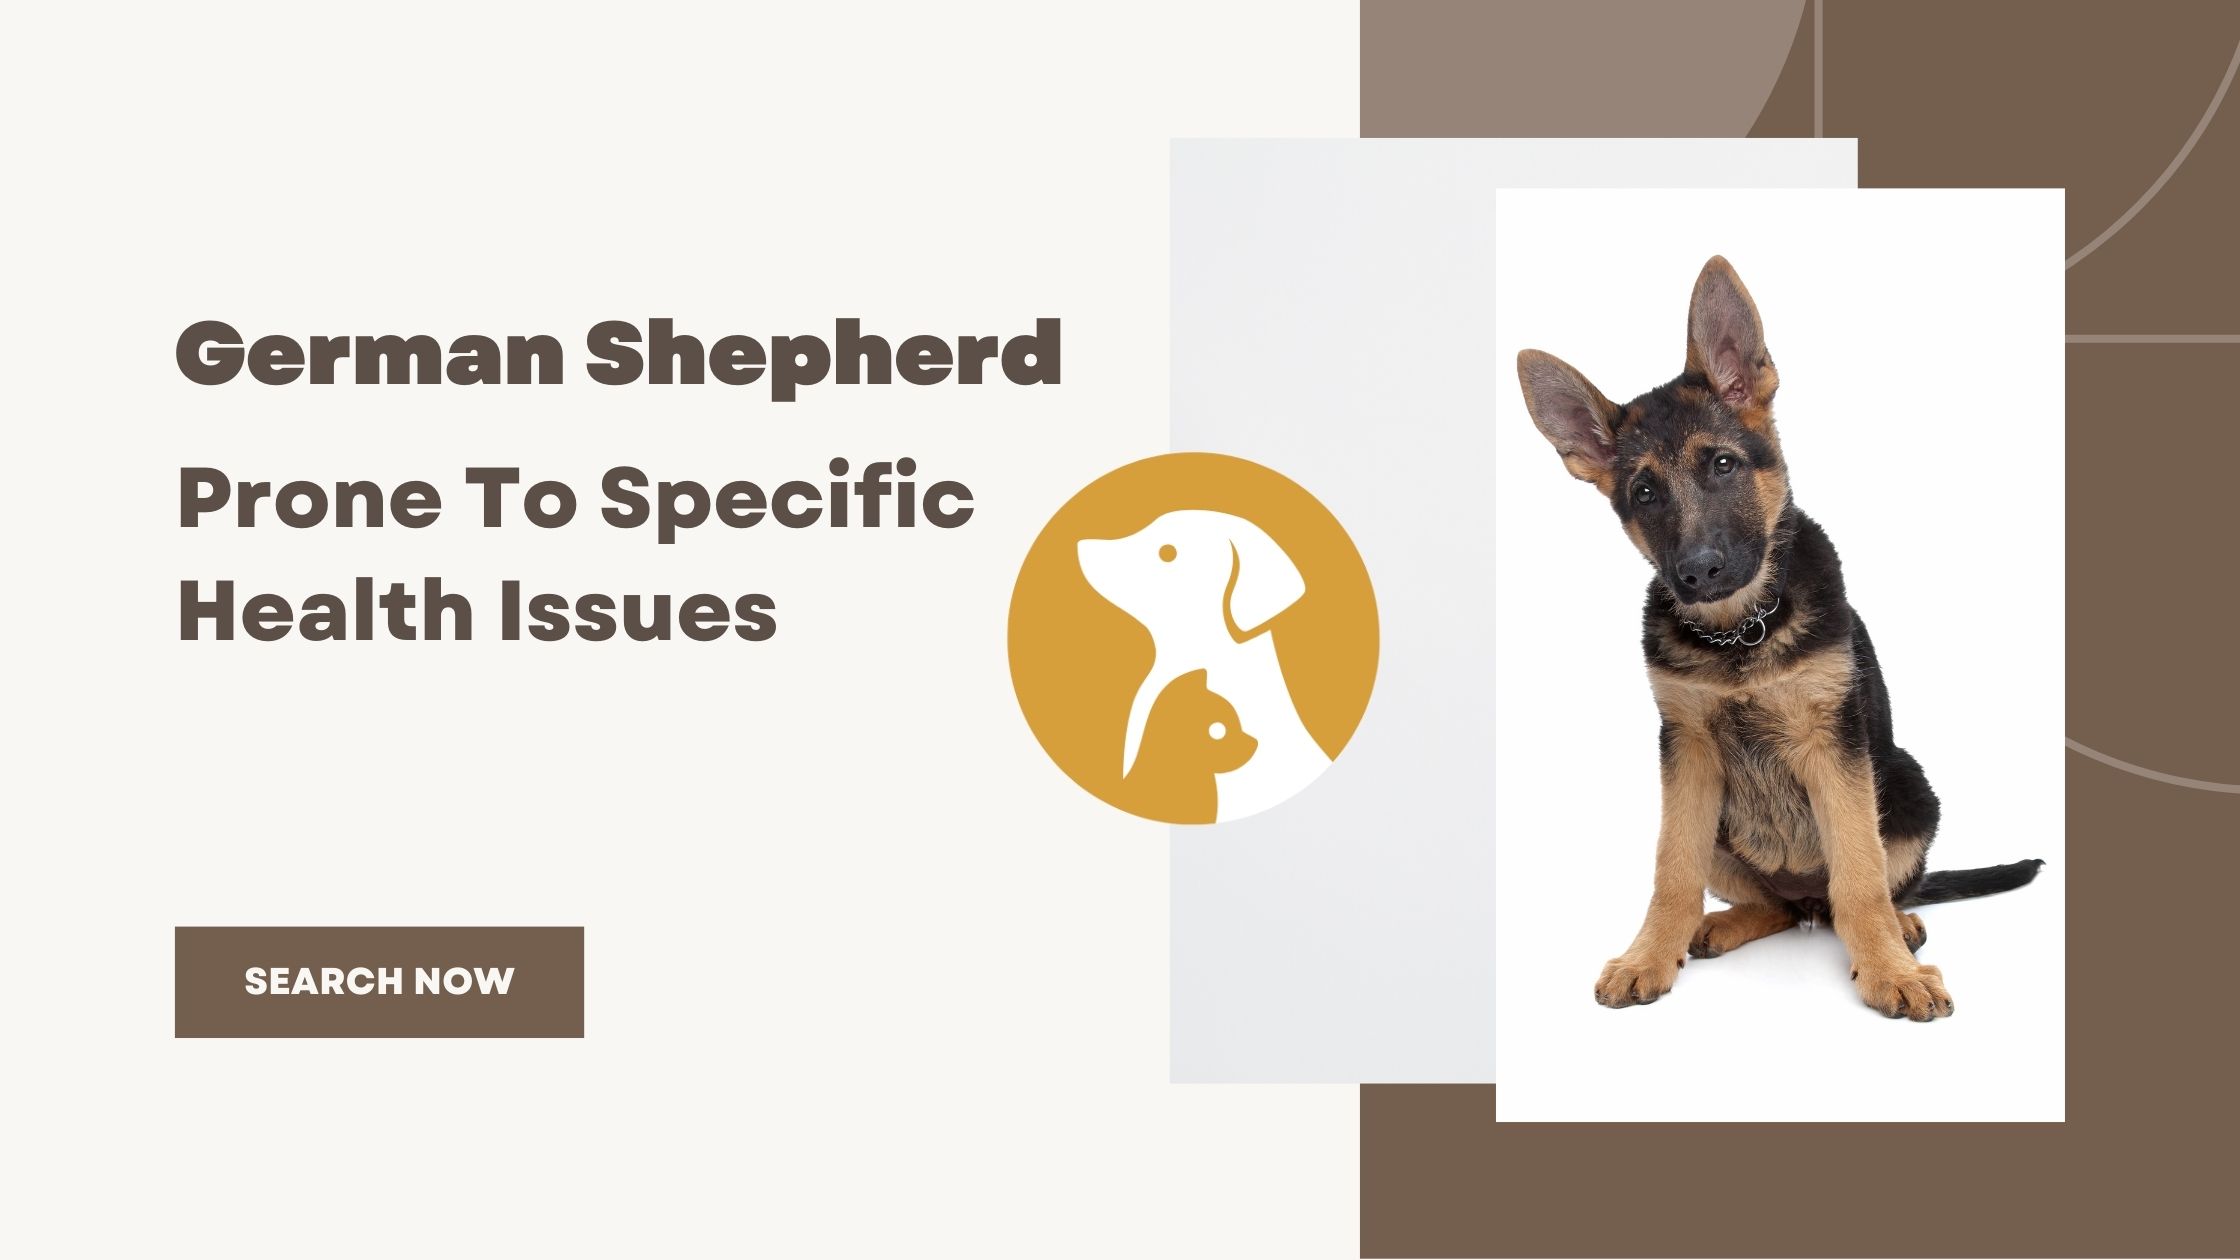 Are German Shepherds Prone To Specific Health Issues